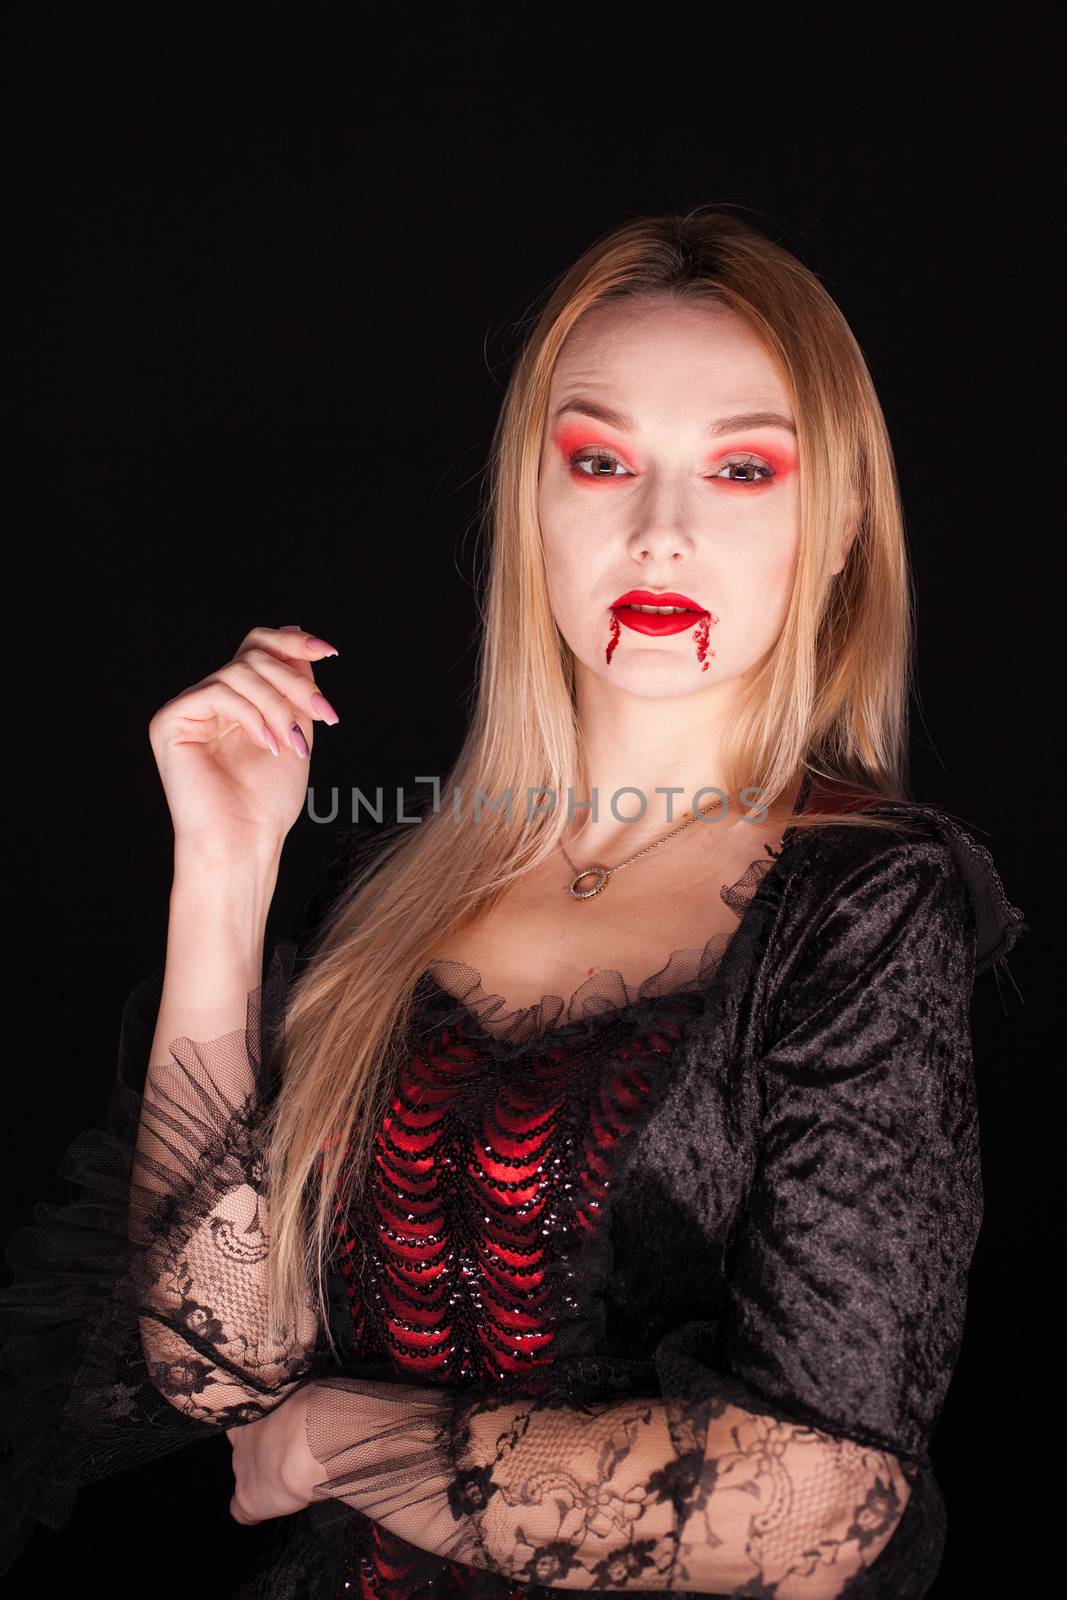 Caucasian girl dressed up like a vampire for halloween by DCStudio